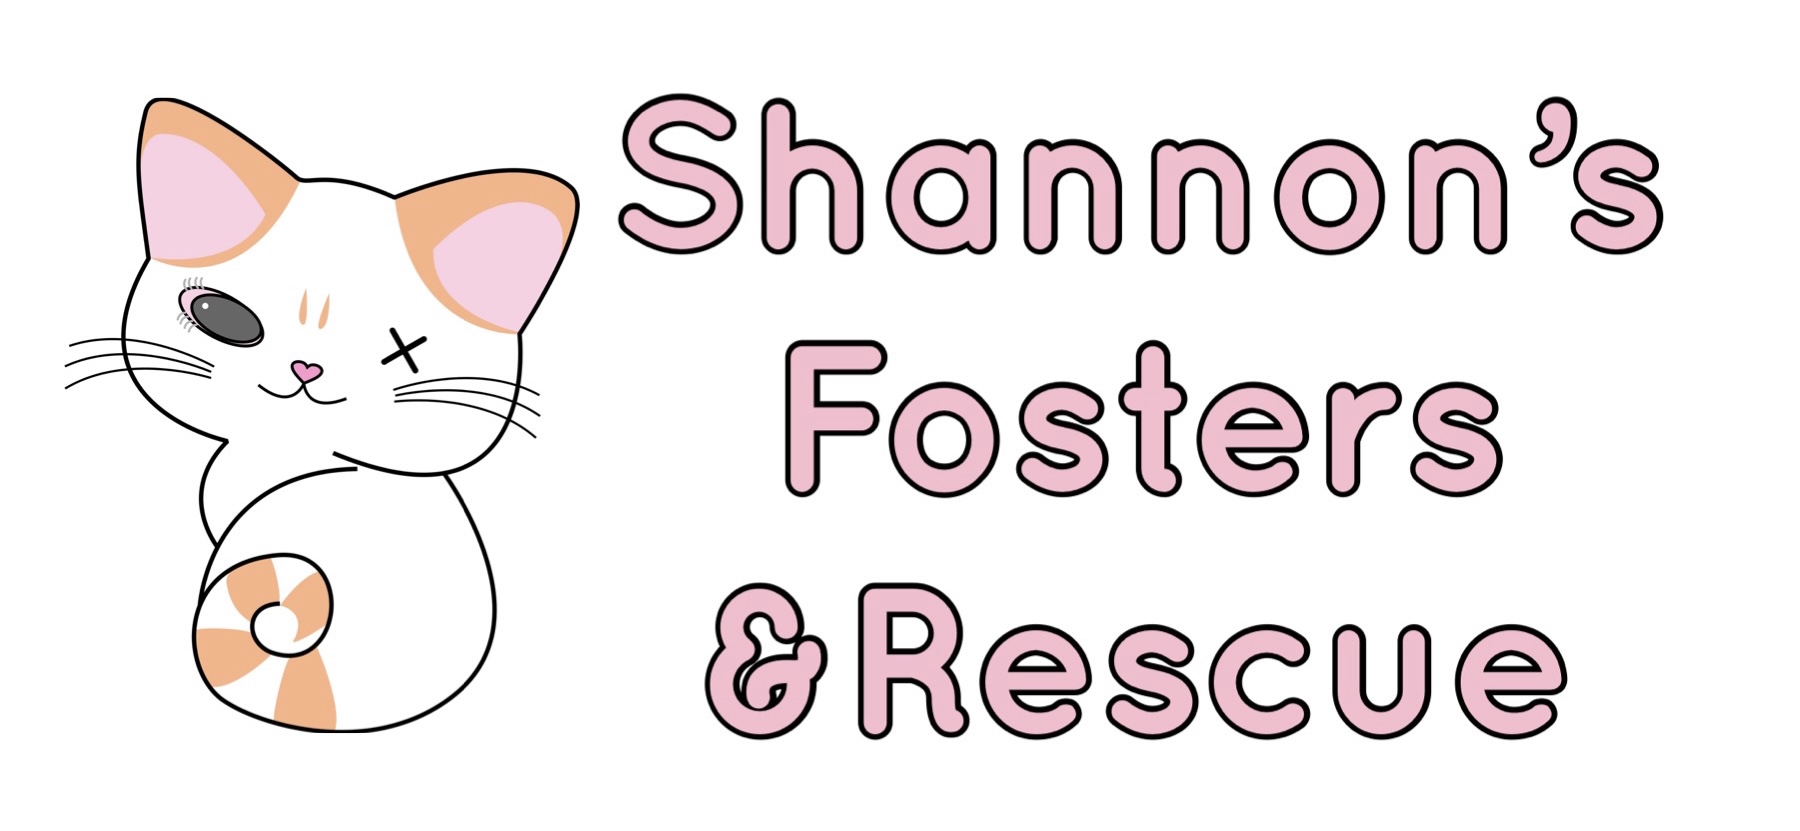 Shannon’s Fosters